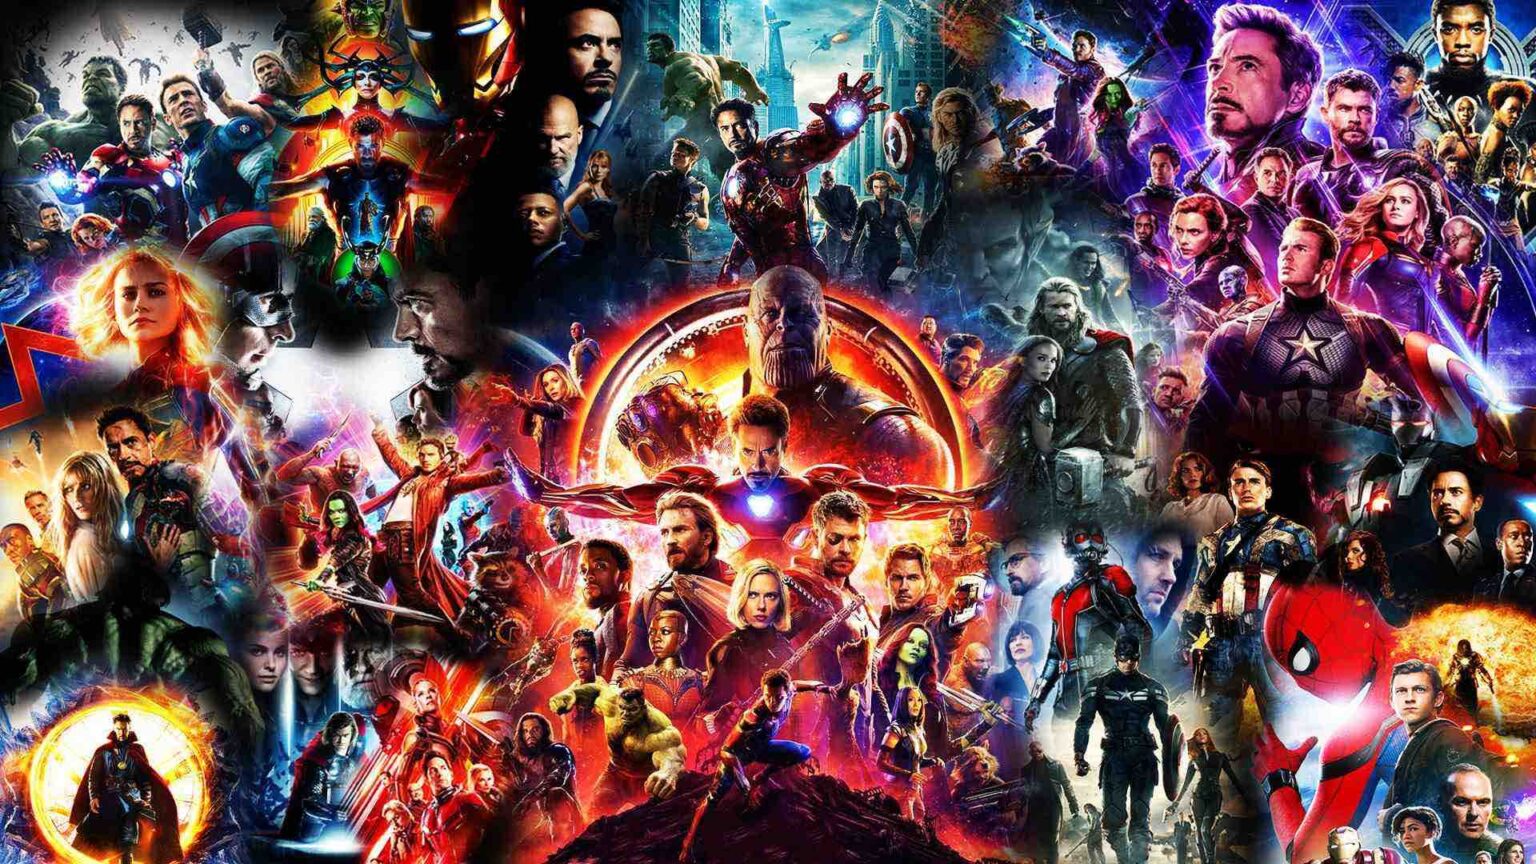 Want to marathon all 23 MCU movies? Assemble your own squad of Avengers with this handy streaming guide for the ultimate Marvel-a-thon.